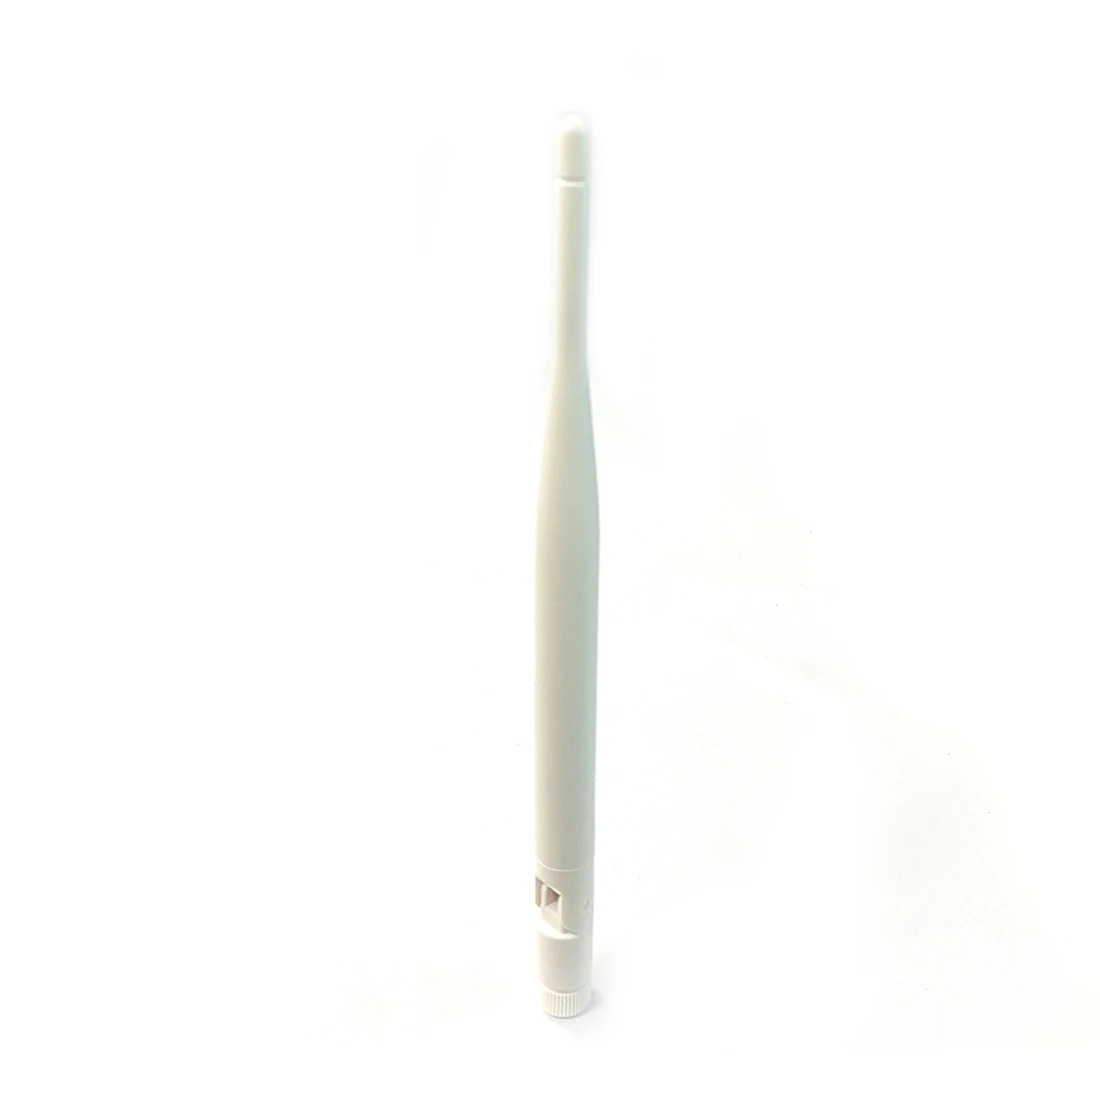 

1PC WIFI Antenna 2.4GHz 6dBi SMA Male Wireless WLAN White Floding Aerial 20cm For PCI Card Modem Router NEW